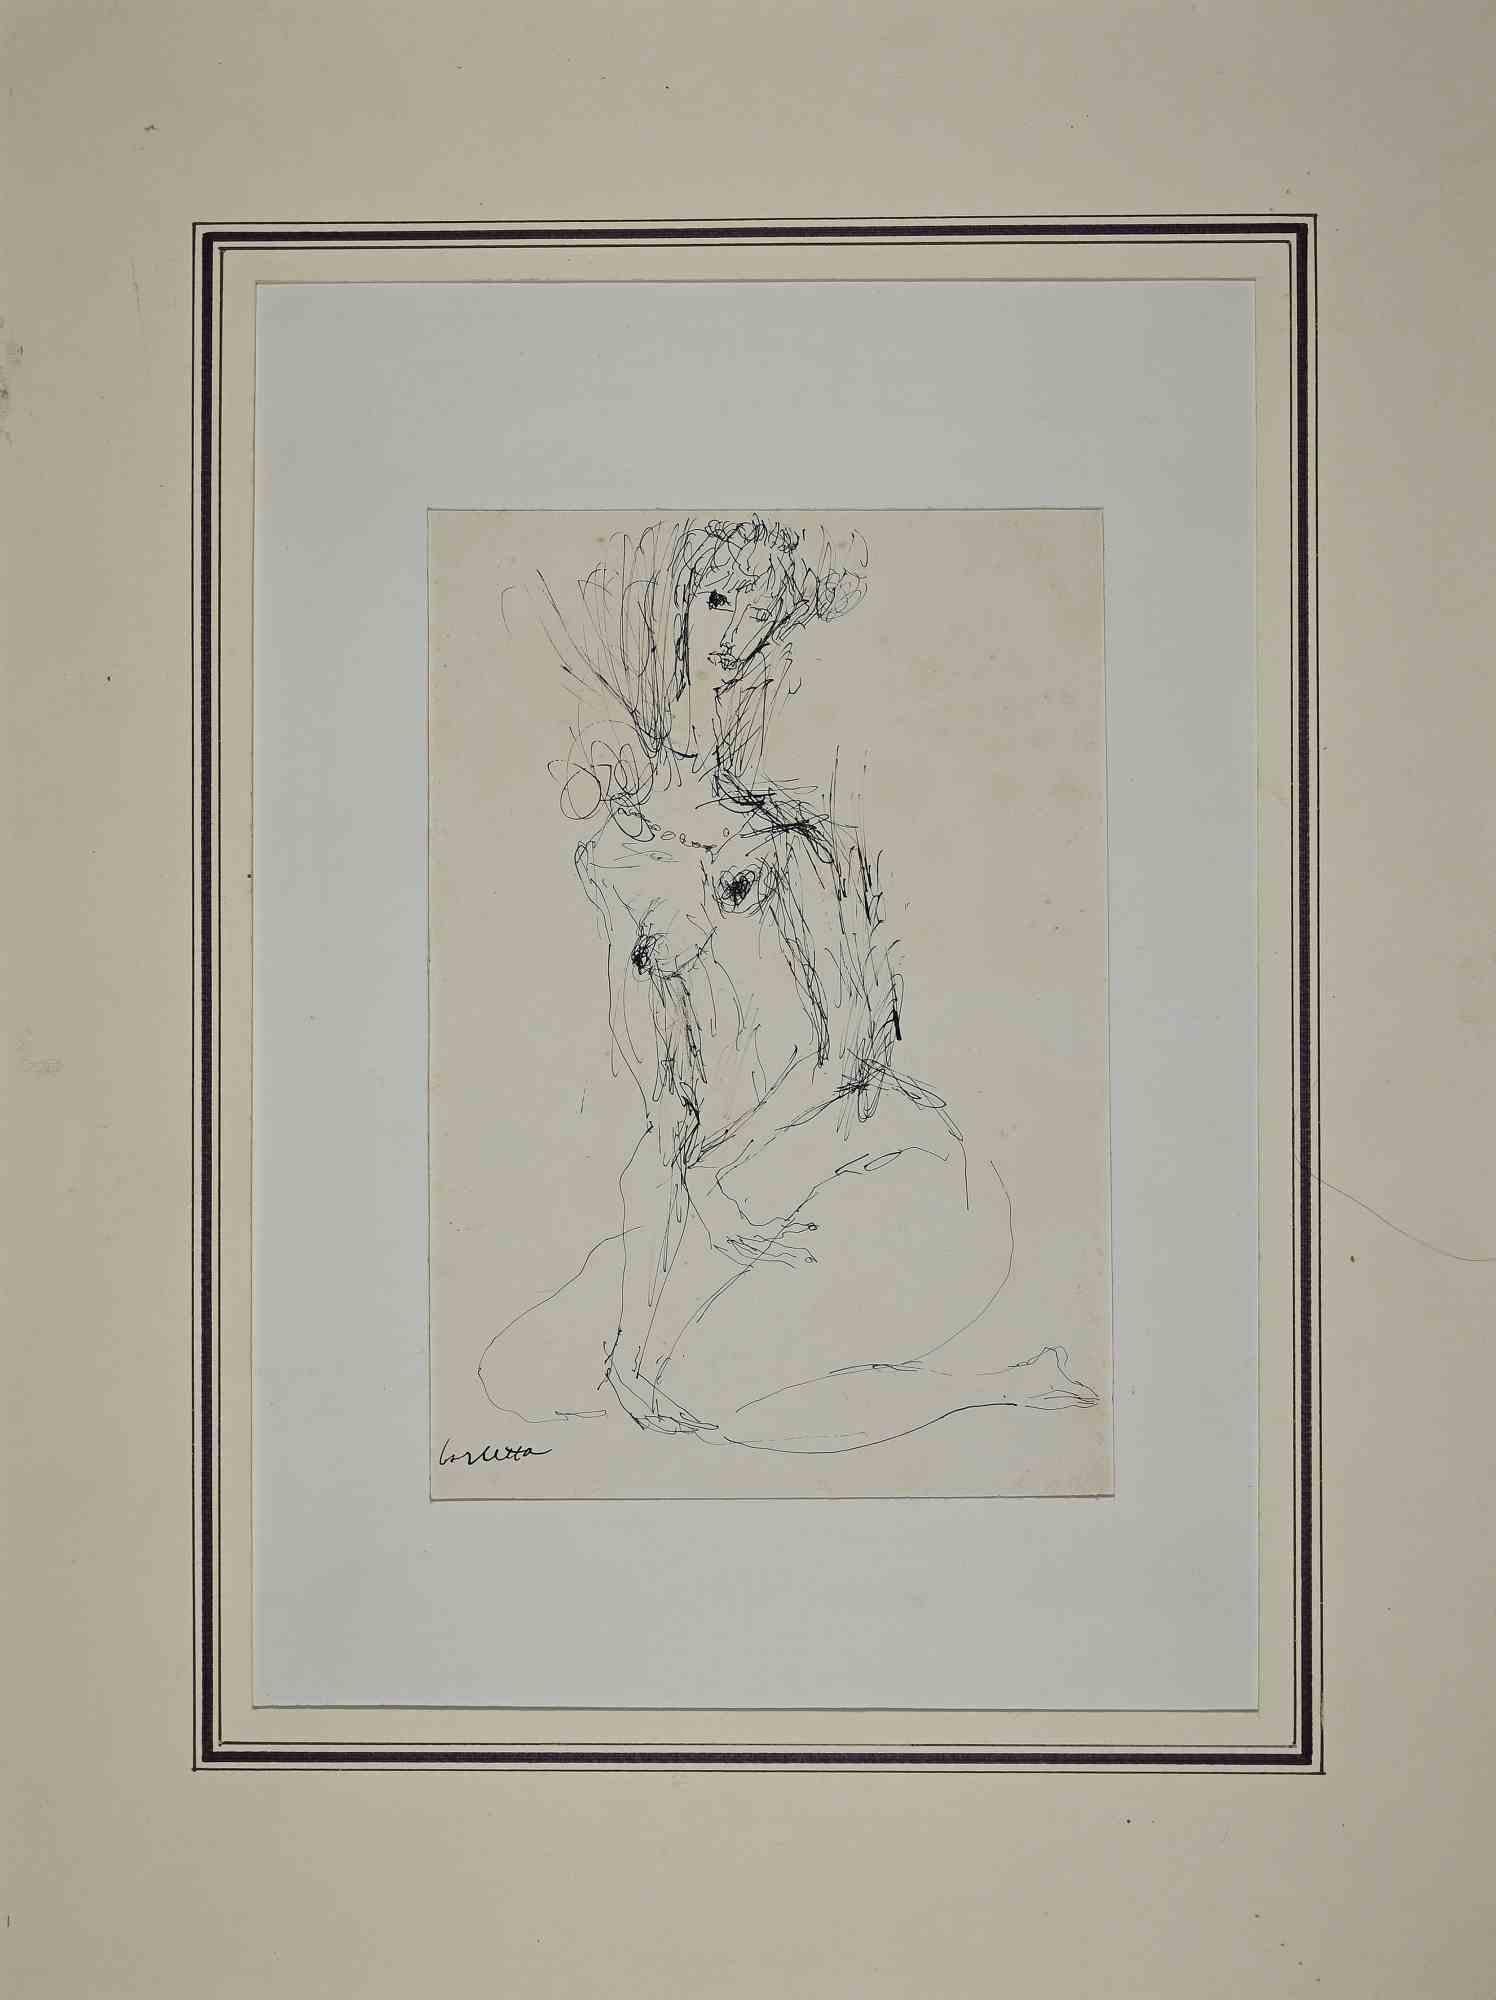 Nude  is an original Pen drawing on paper realized by Sergio Barletta in The 1970s.

Good conditions.

Hand-Signed.

Sergio Barletta (1934) is an Italian cartoonist and illustrator, who has also published some humorous and political satire